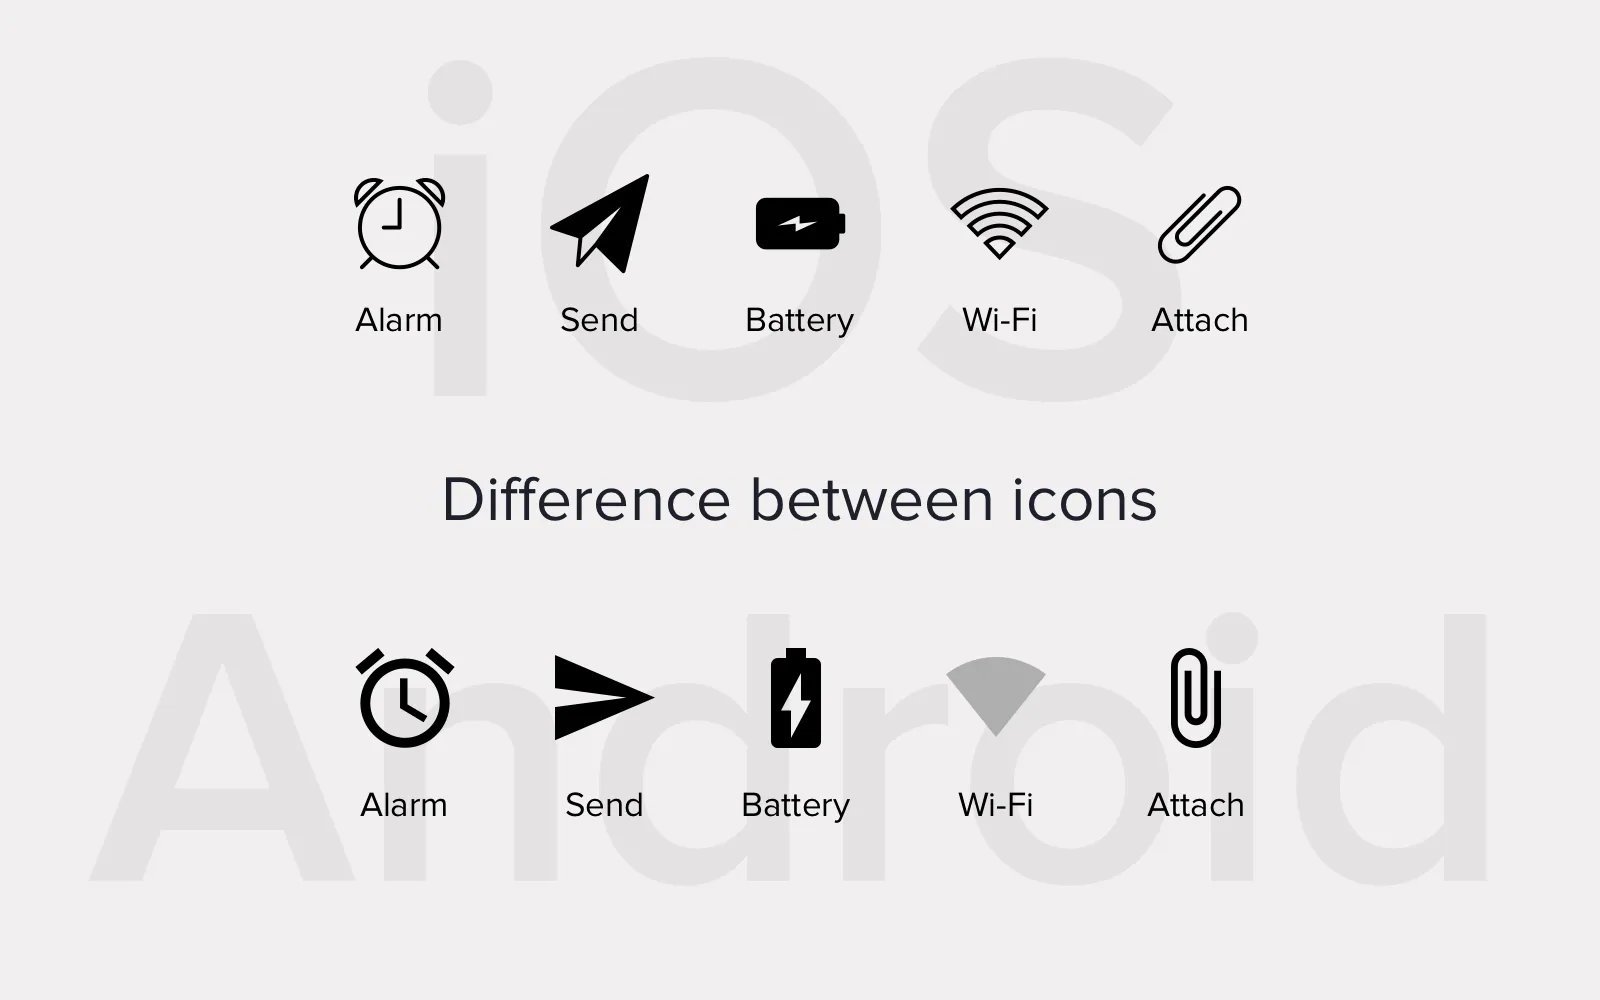 Difference between iOS and Android icons